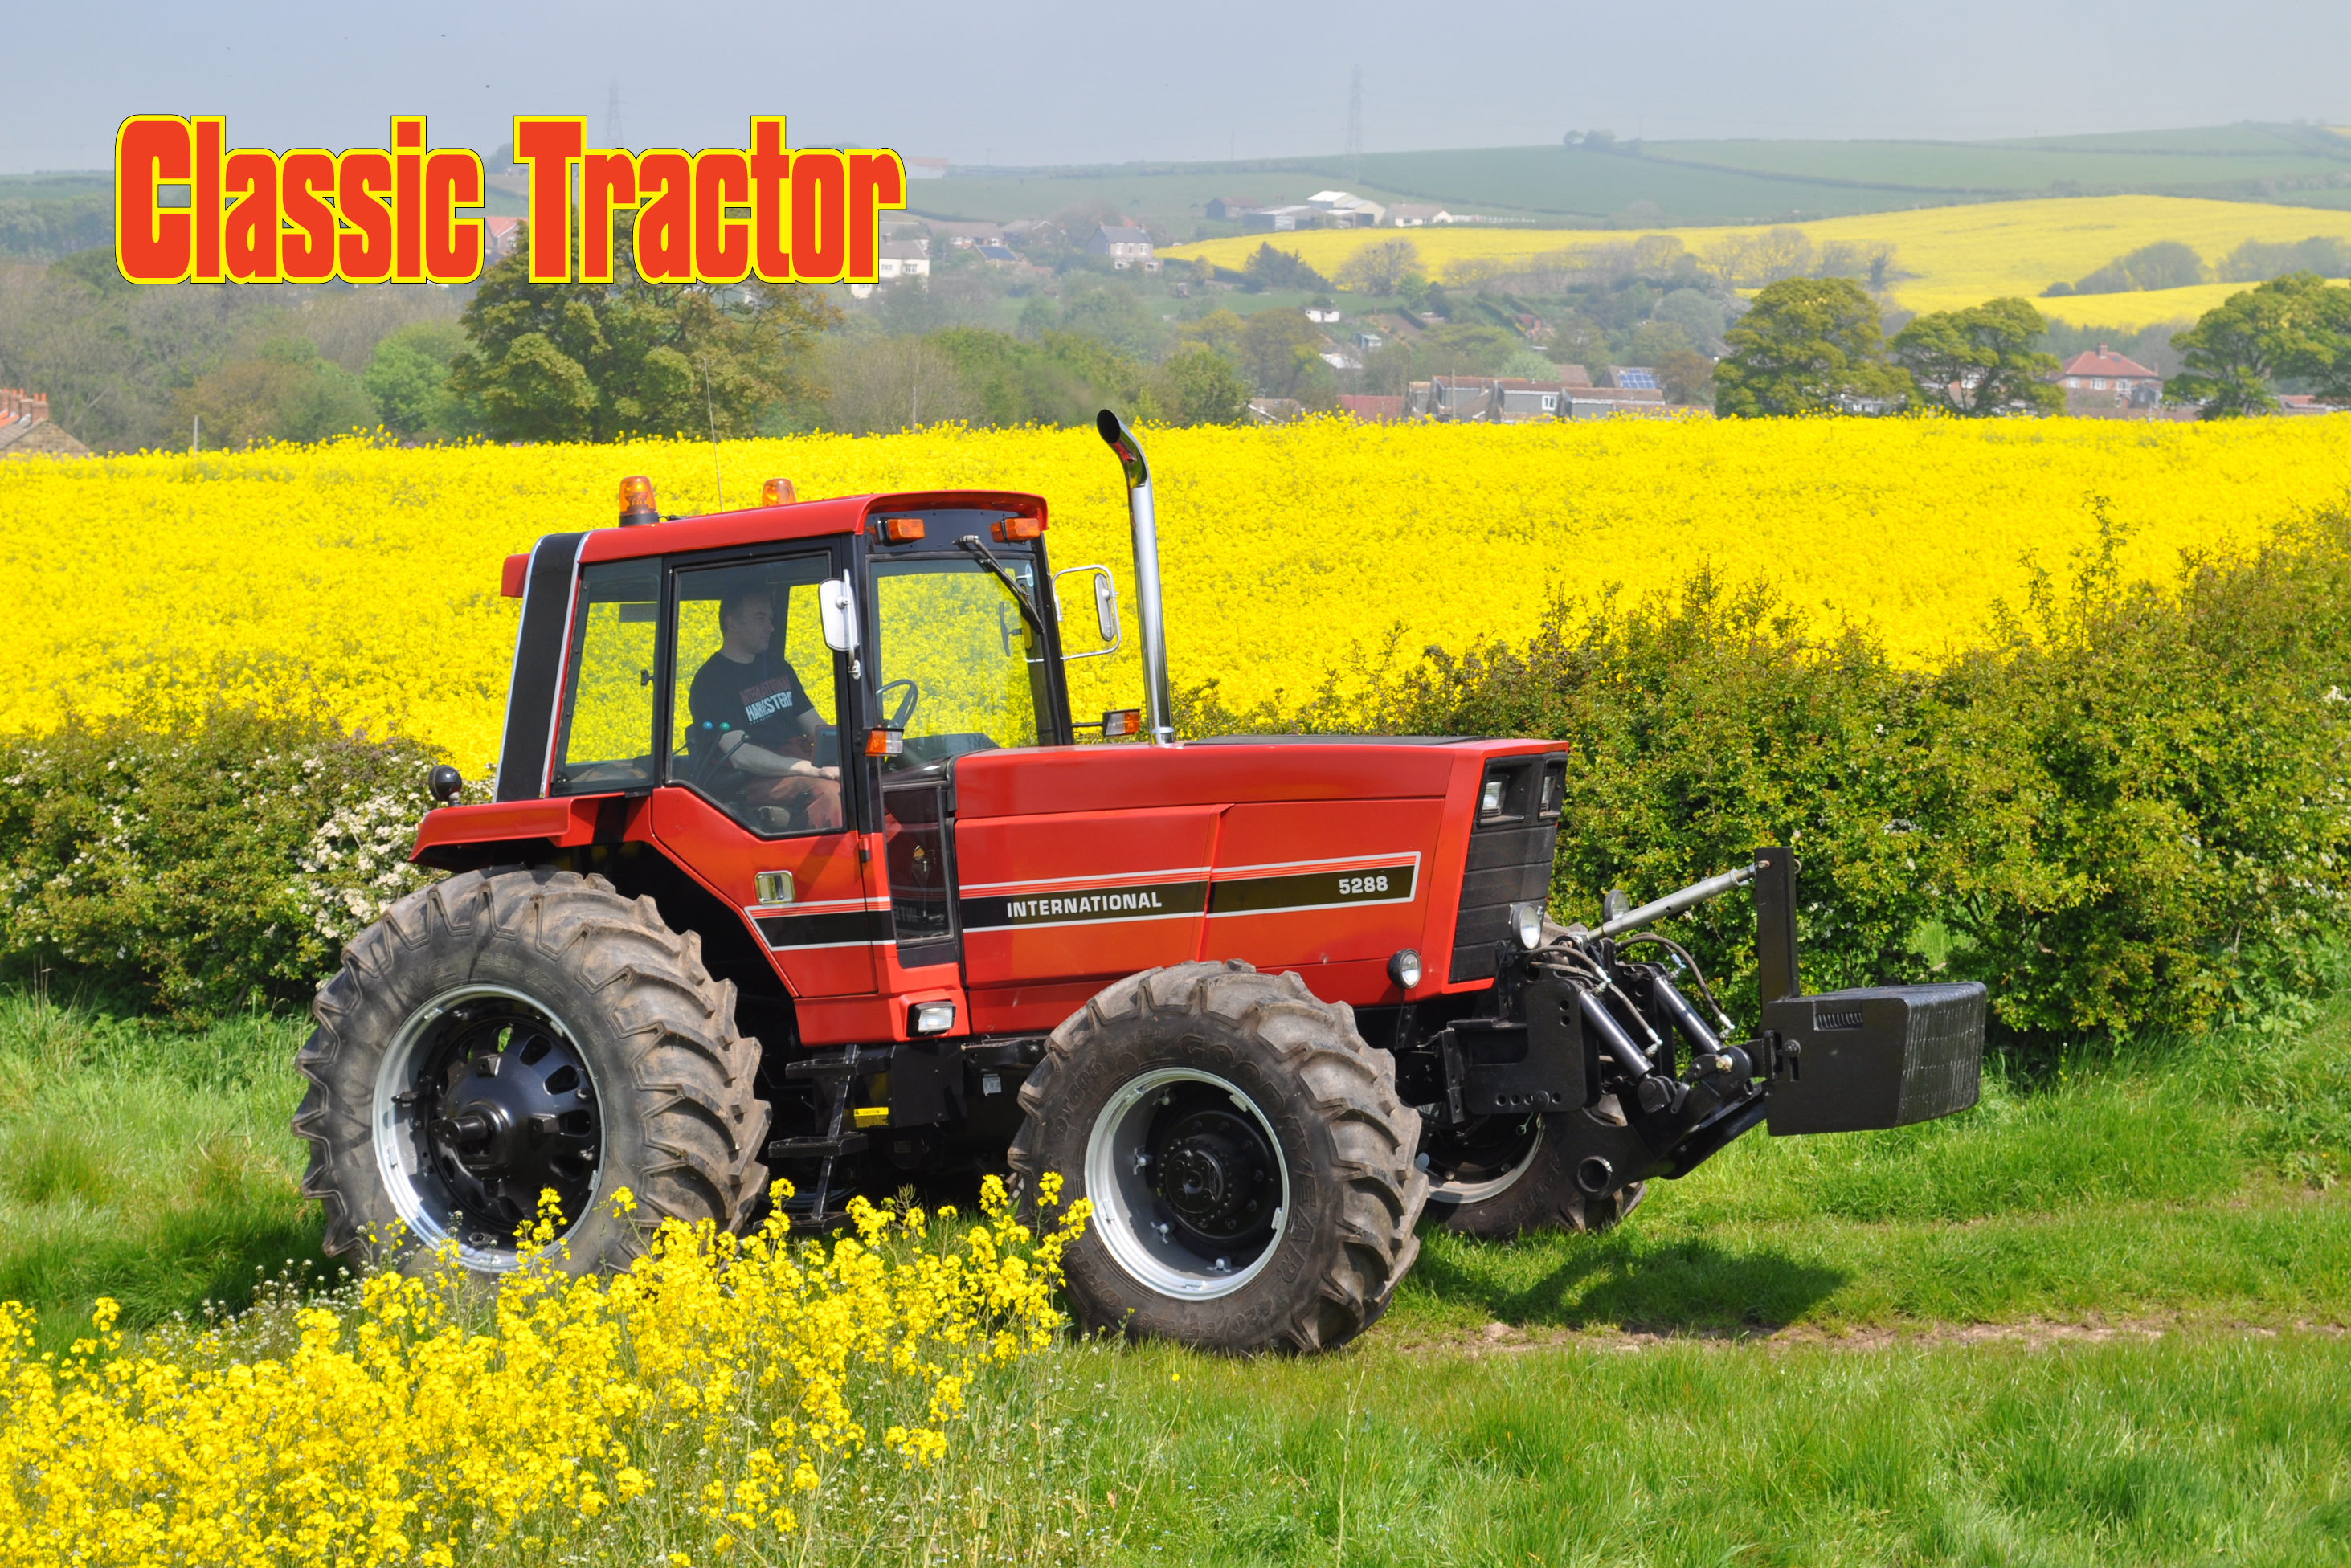 Wallpapers CLASSIC TRACTOR MAGAZINE